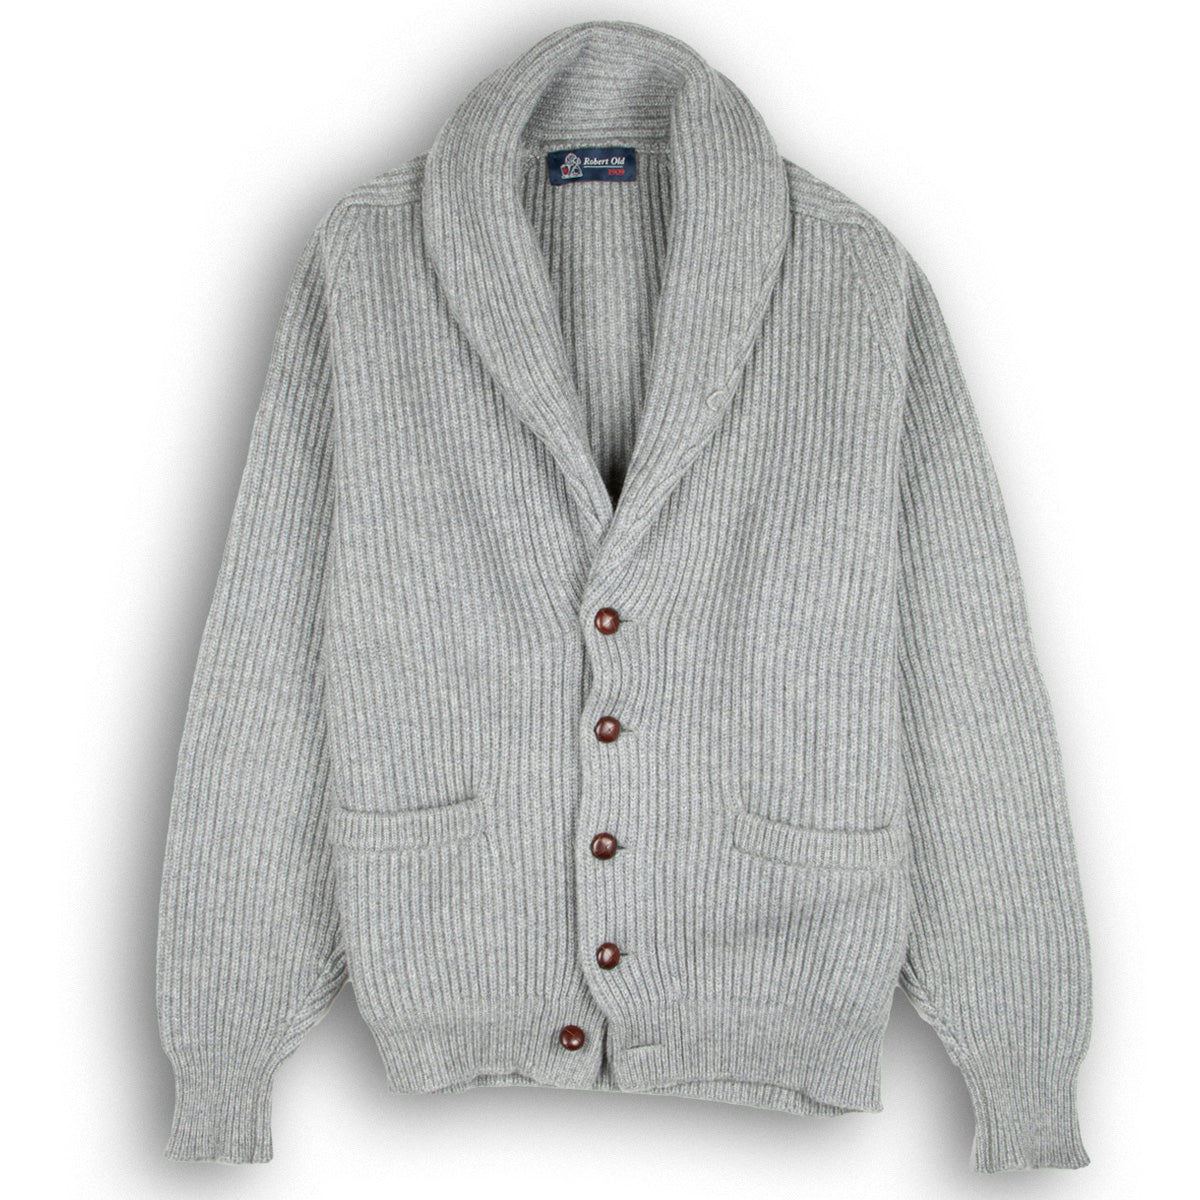 Flannel Grey Colonial 8ply Cashmere Shawl Cardigan  Robert Old   